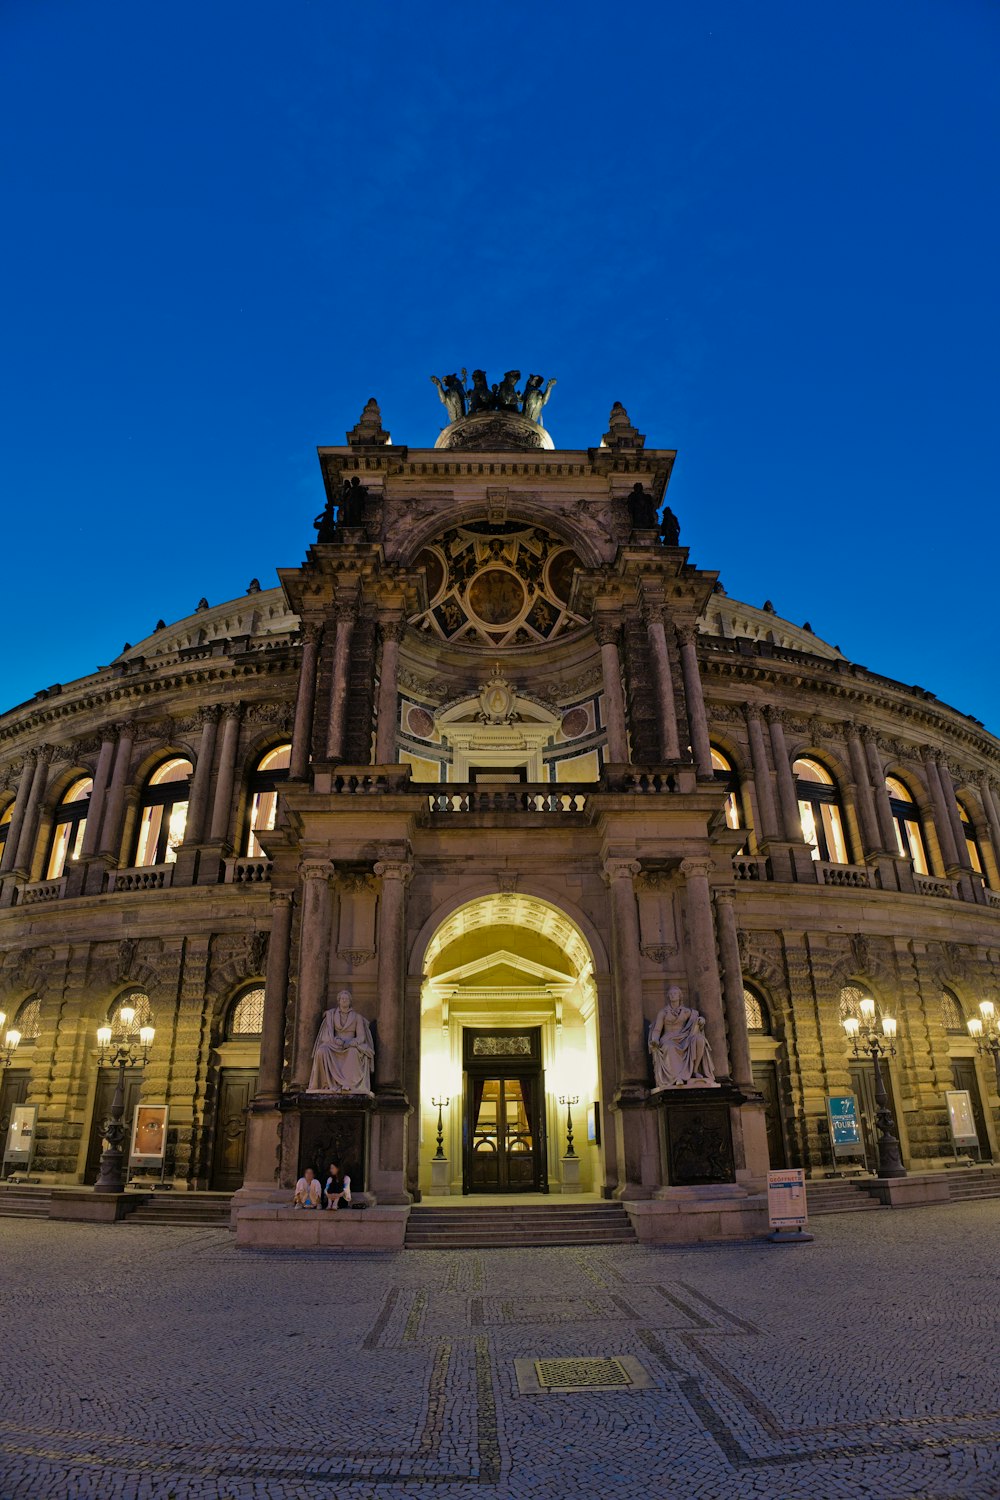 a large ornate building with statues with Semperoper in the background